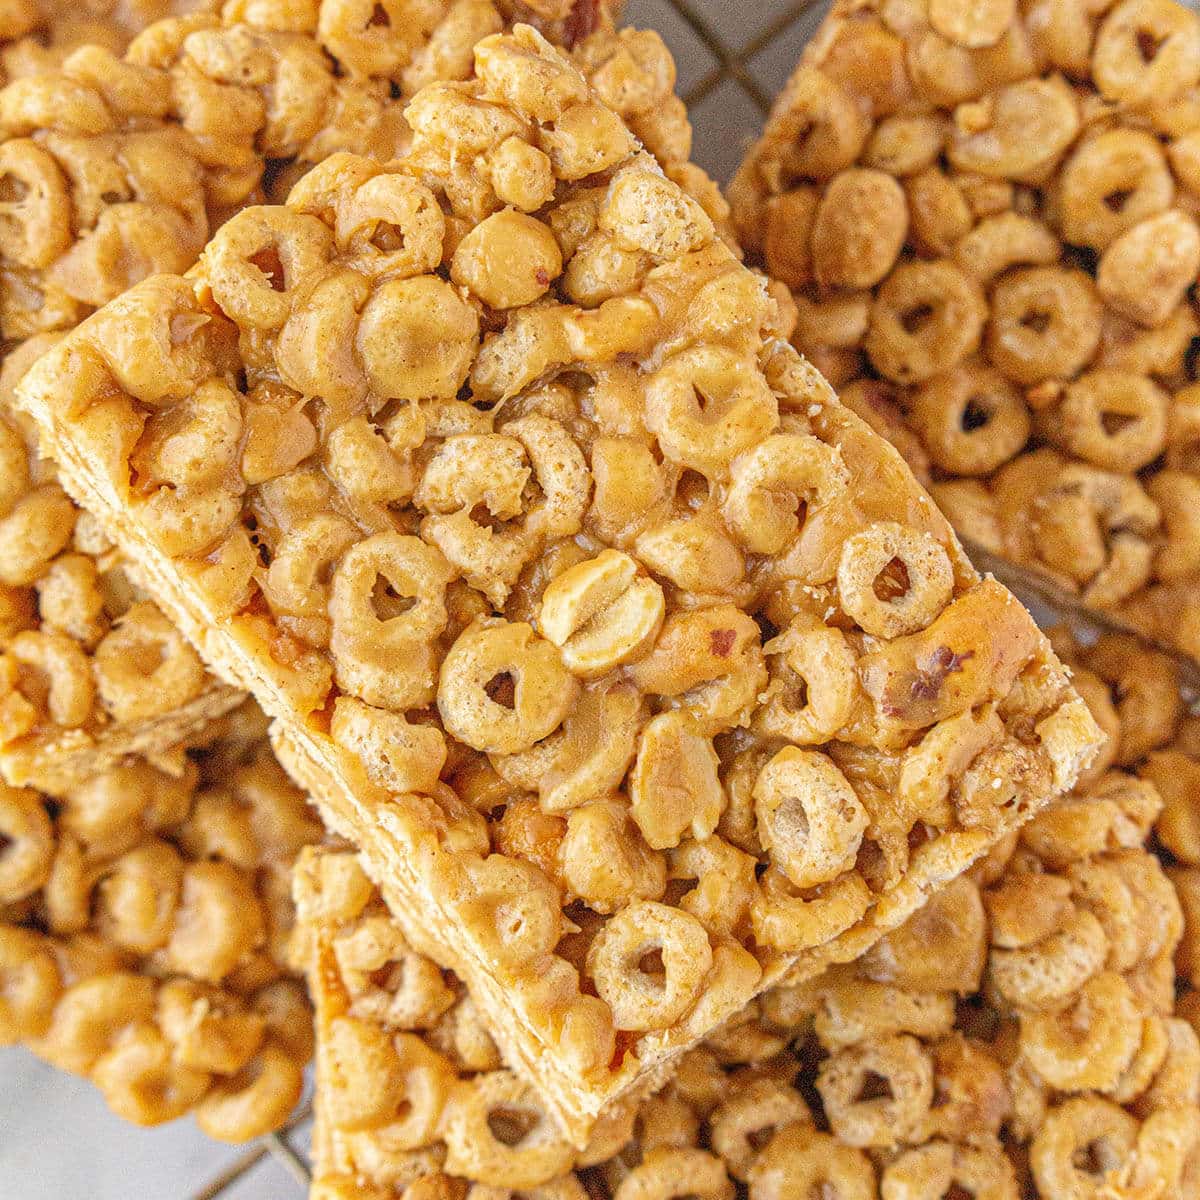 A pile of peanut butter Cheerio bars on a plate.